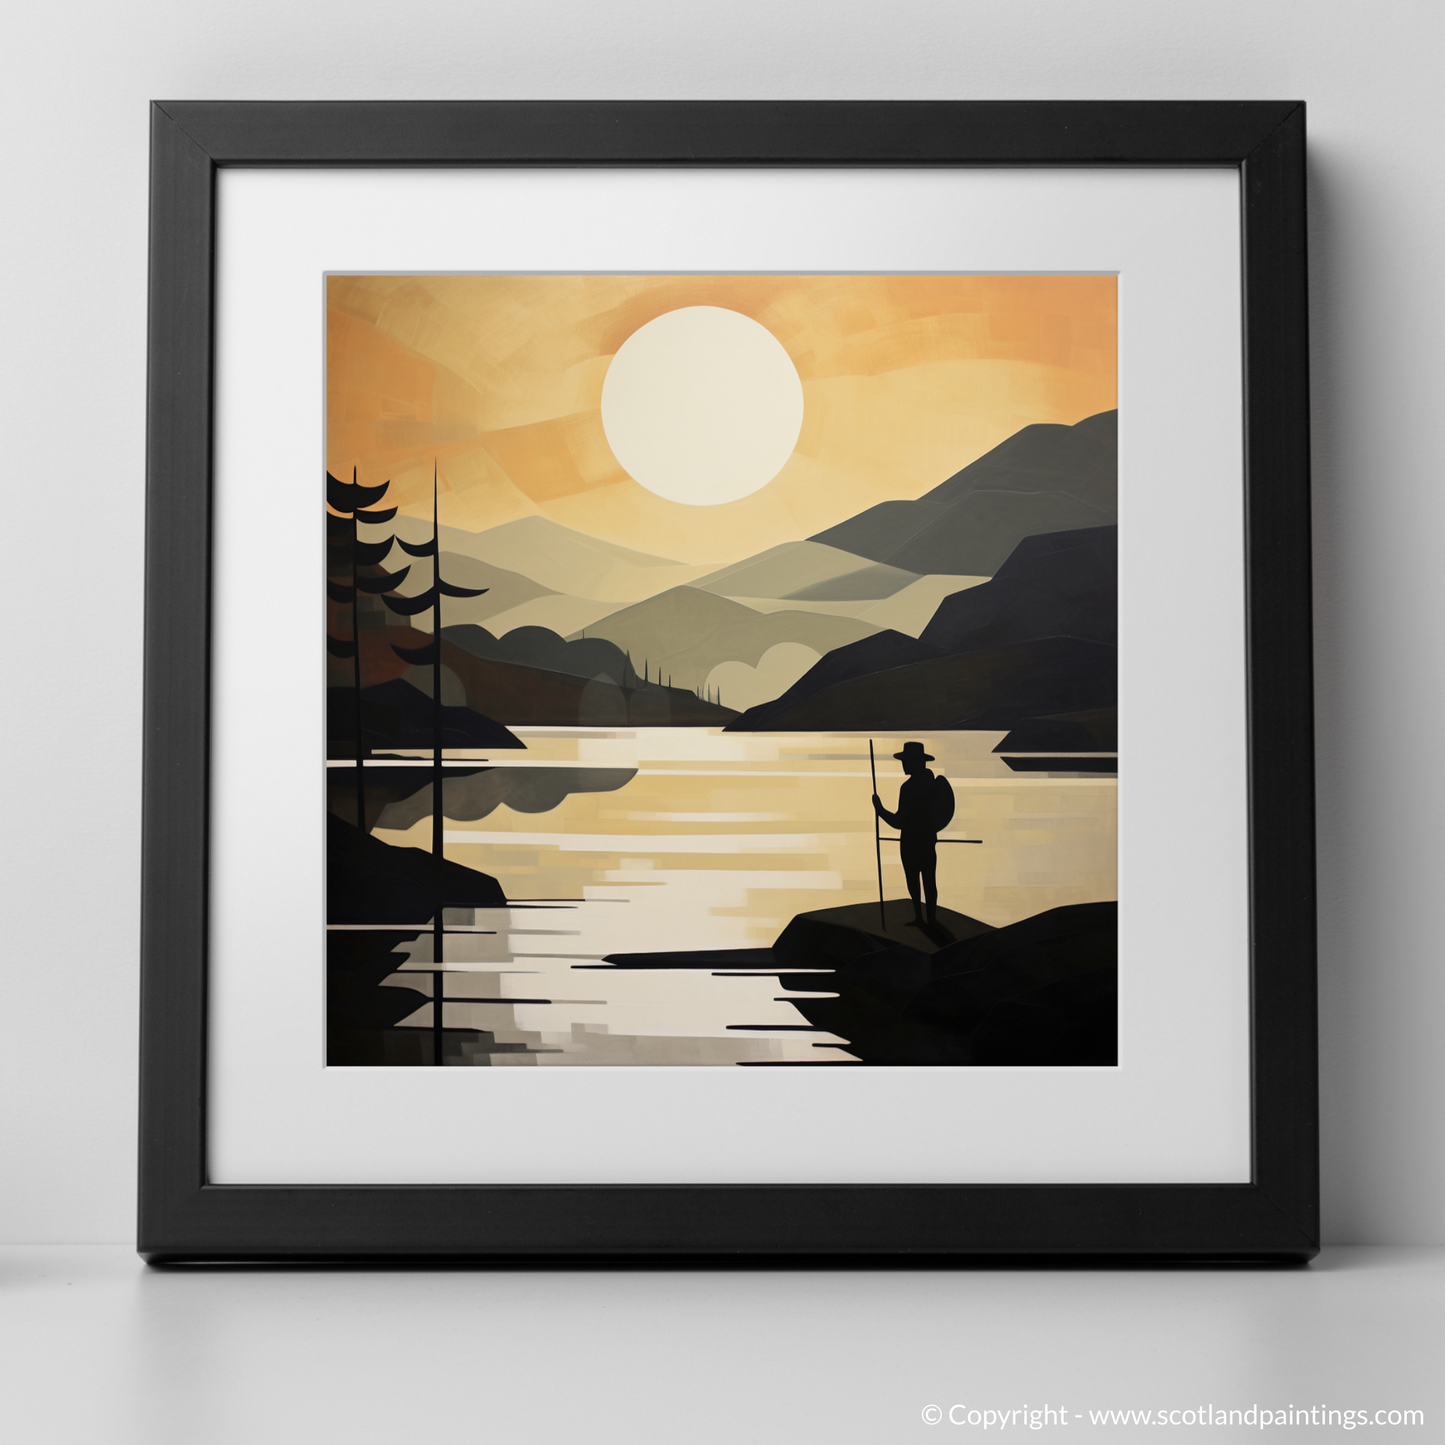 Painting and Art Print of Silhouetted fisherman on Loch Lomond. Silhouetted Fisherman at Dusk: A Cubist Loch Lomond Interpretation.